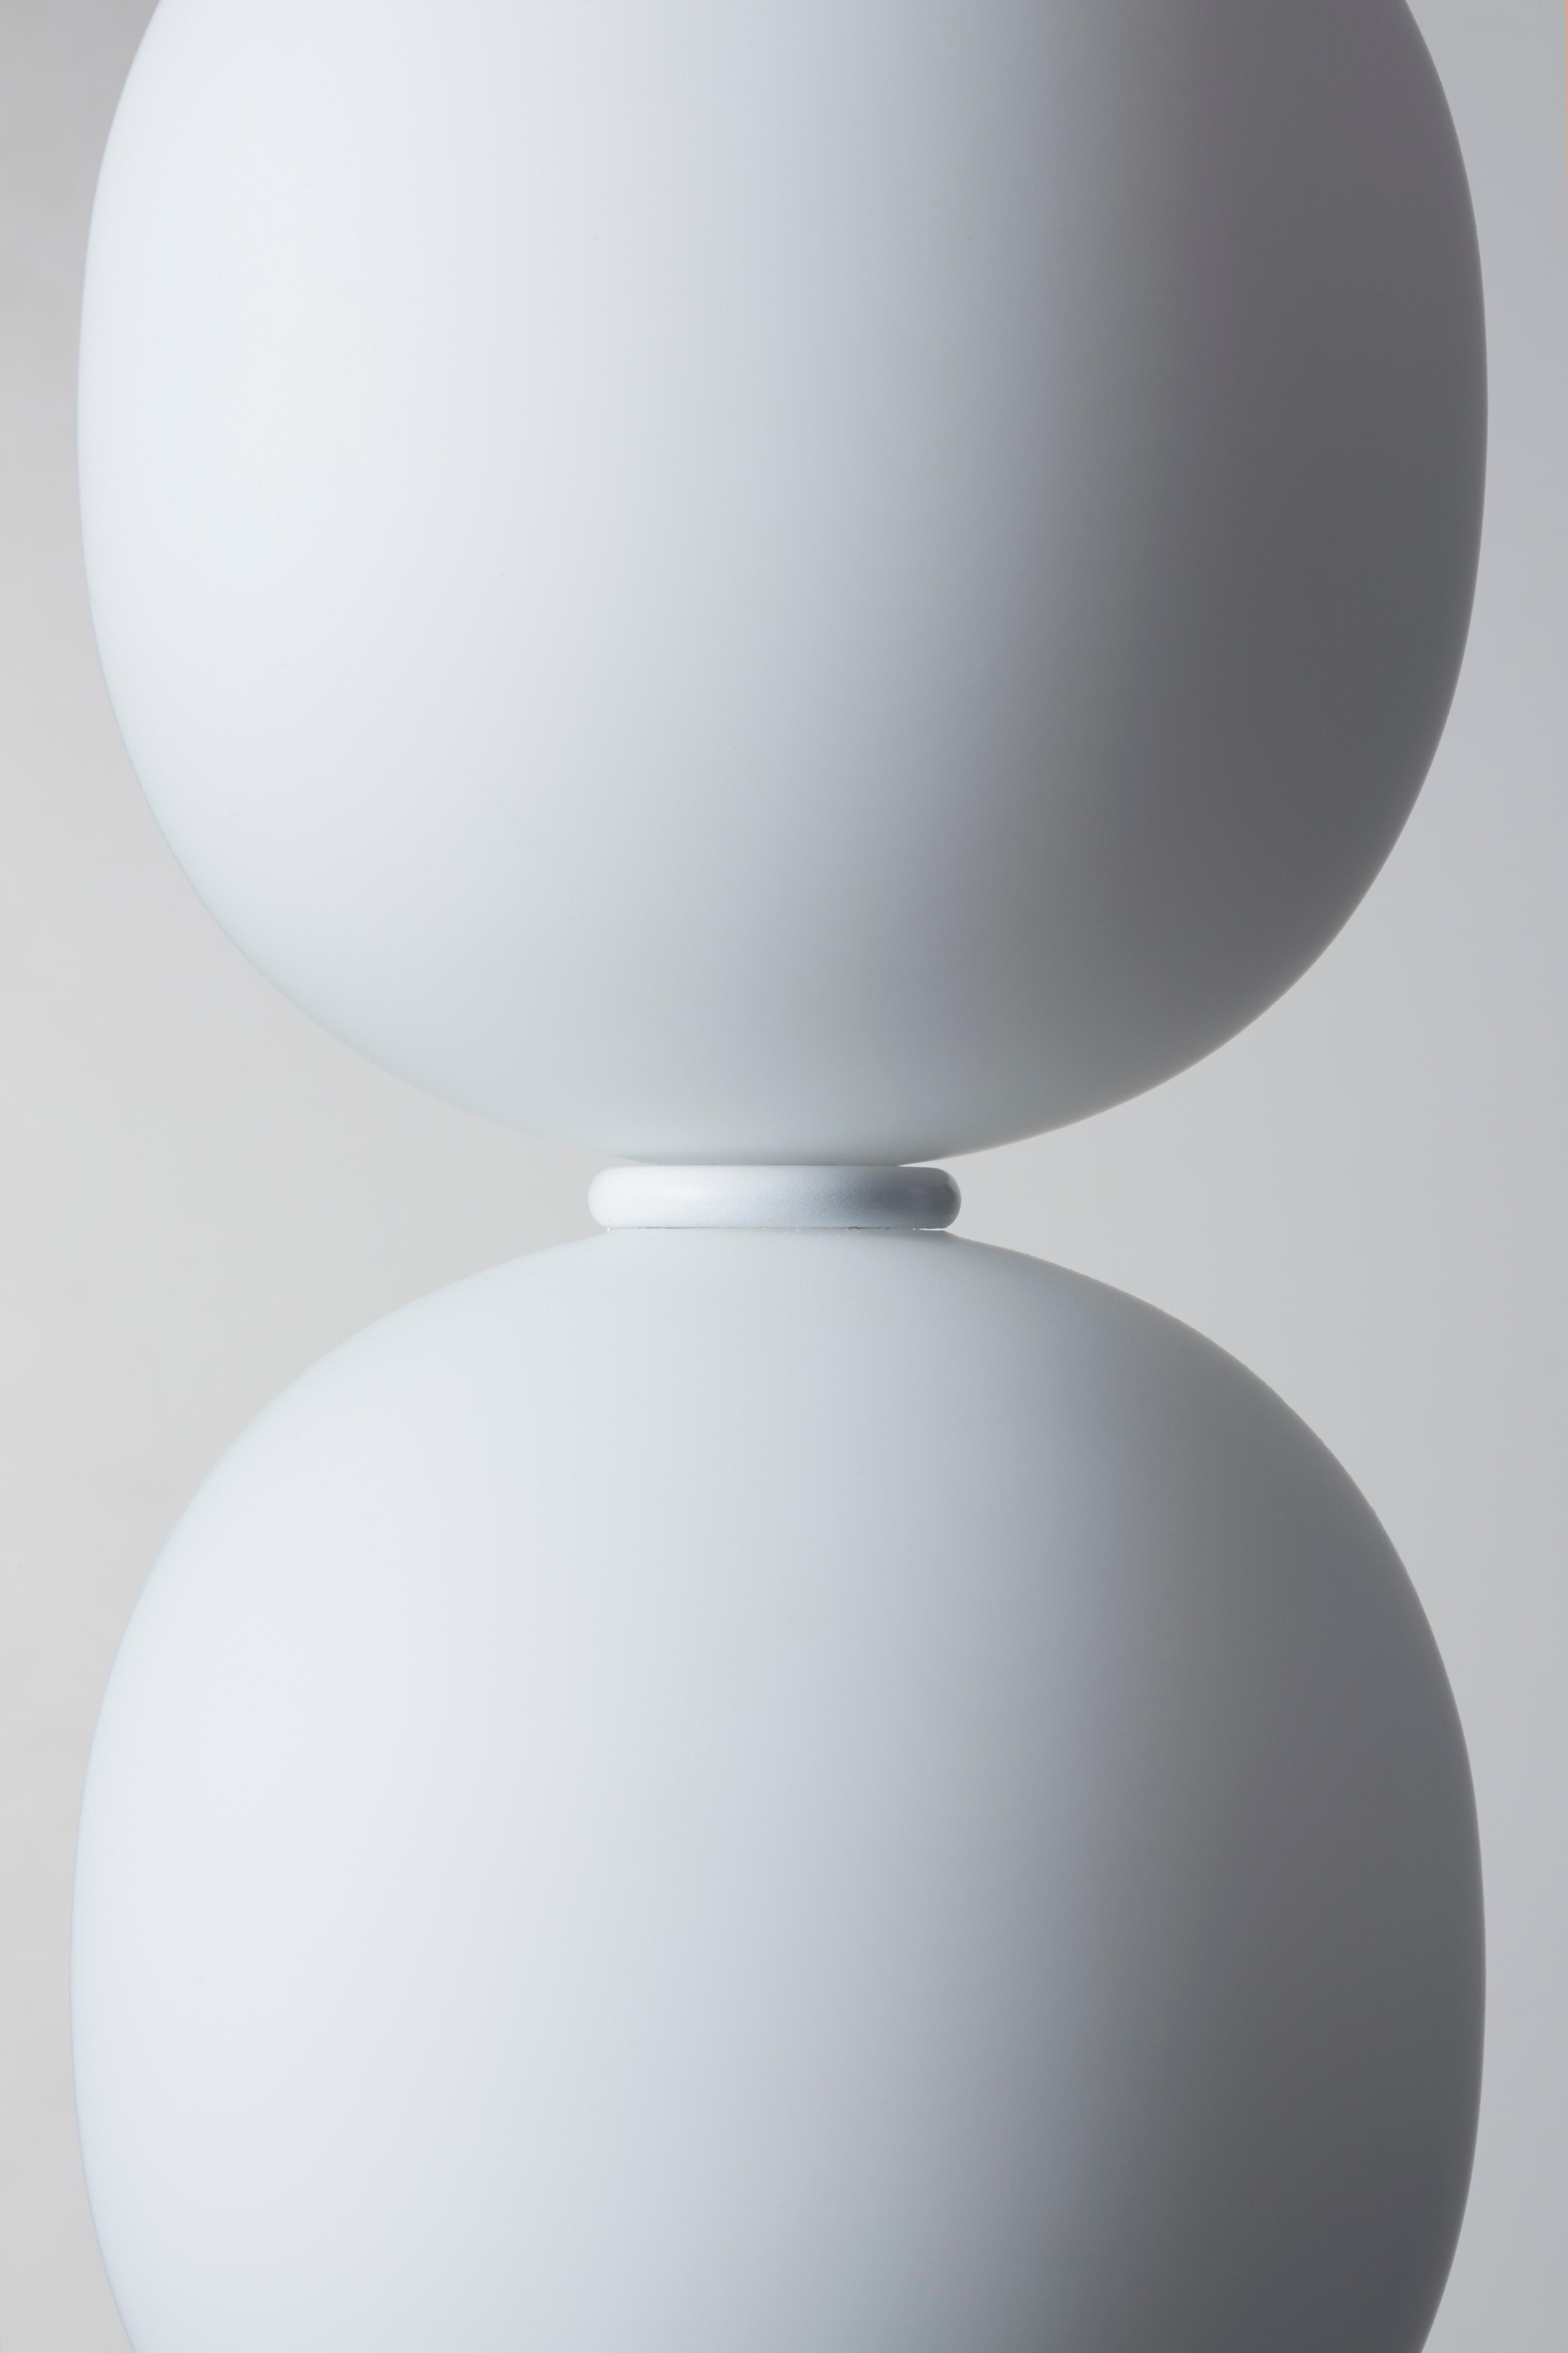 Frosted Grappa G4 by Claesson Koivisto Rune — Pendant Lamp For Sale